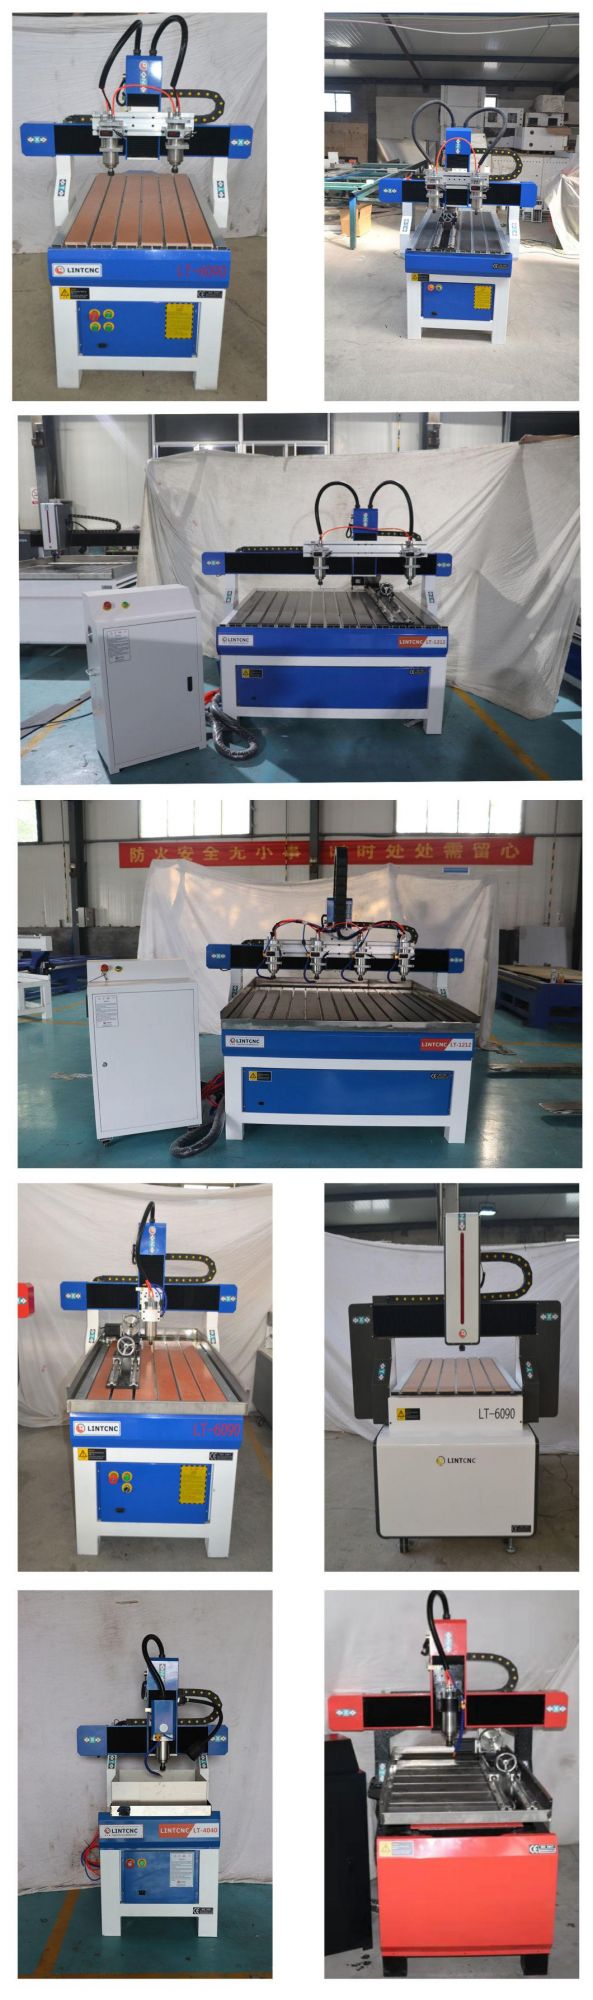 2 4 Heads Spindle Woodworking CNC Router Machine 1.5kw 2.2kw